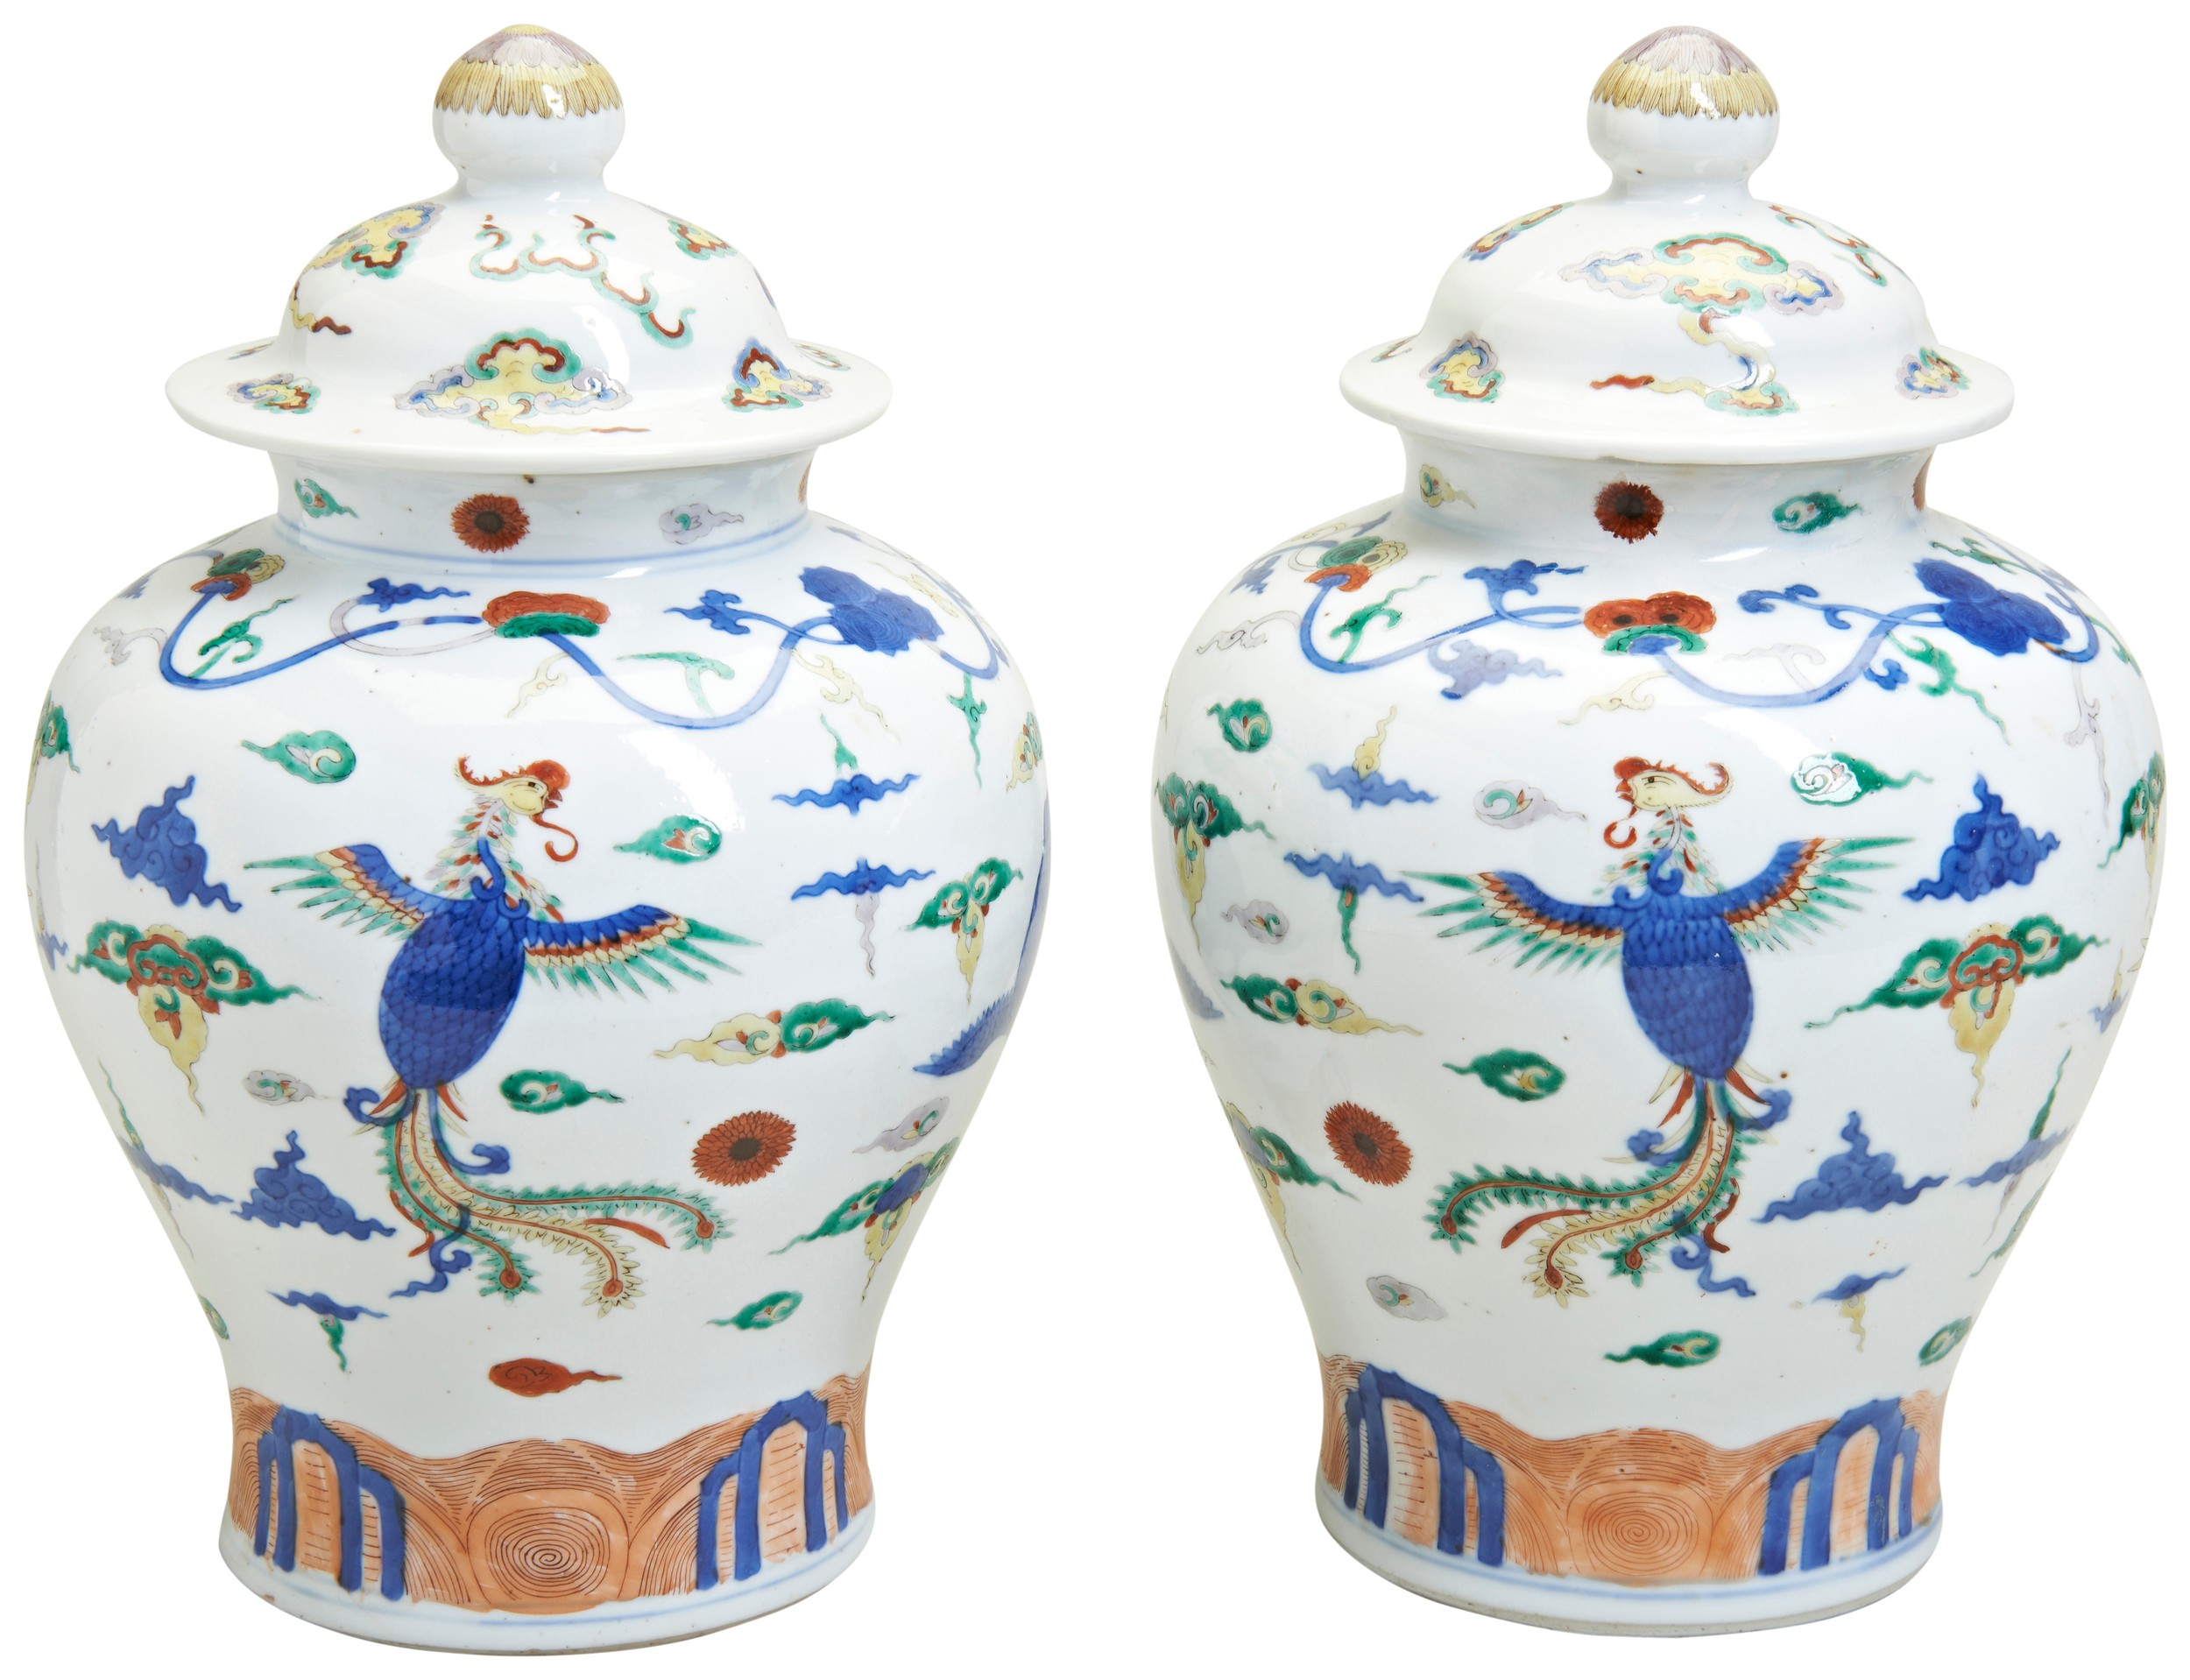 A PAIR OF DOUCAI 'PHOENIX AND CRANE' COVERED JARS QING DYNASTY, LATE 19TH CENTURY the baluster sides